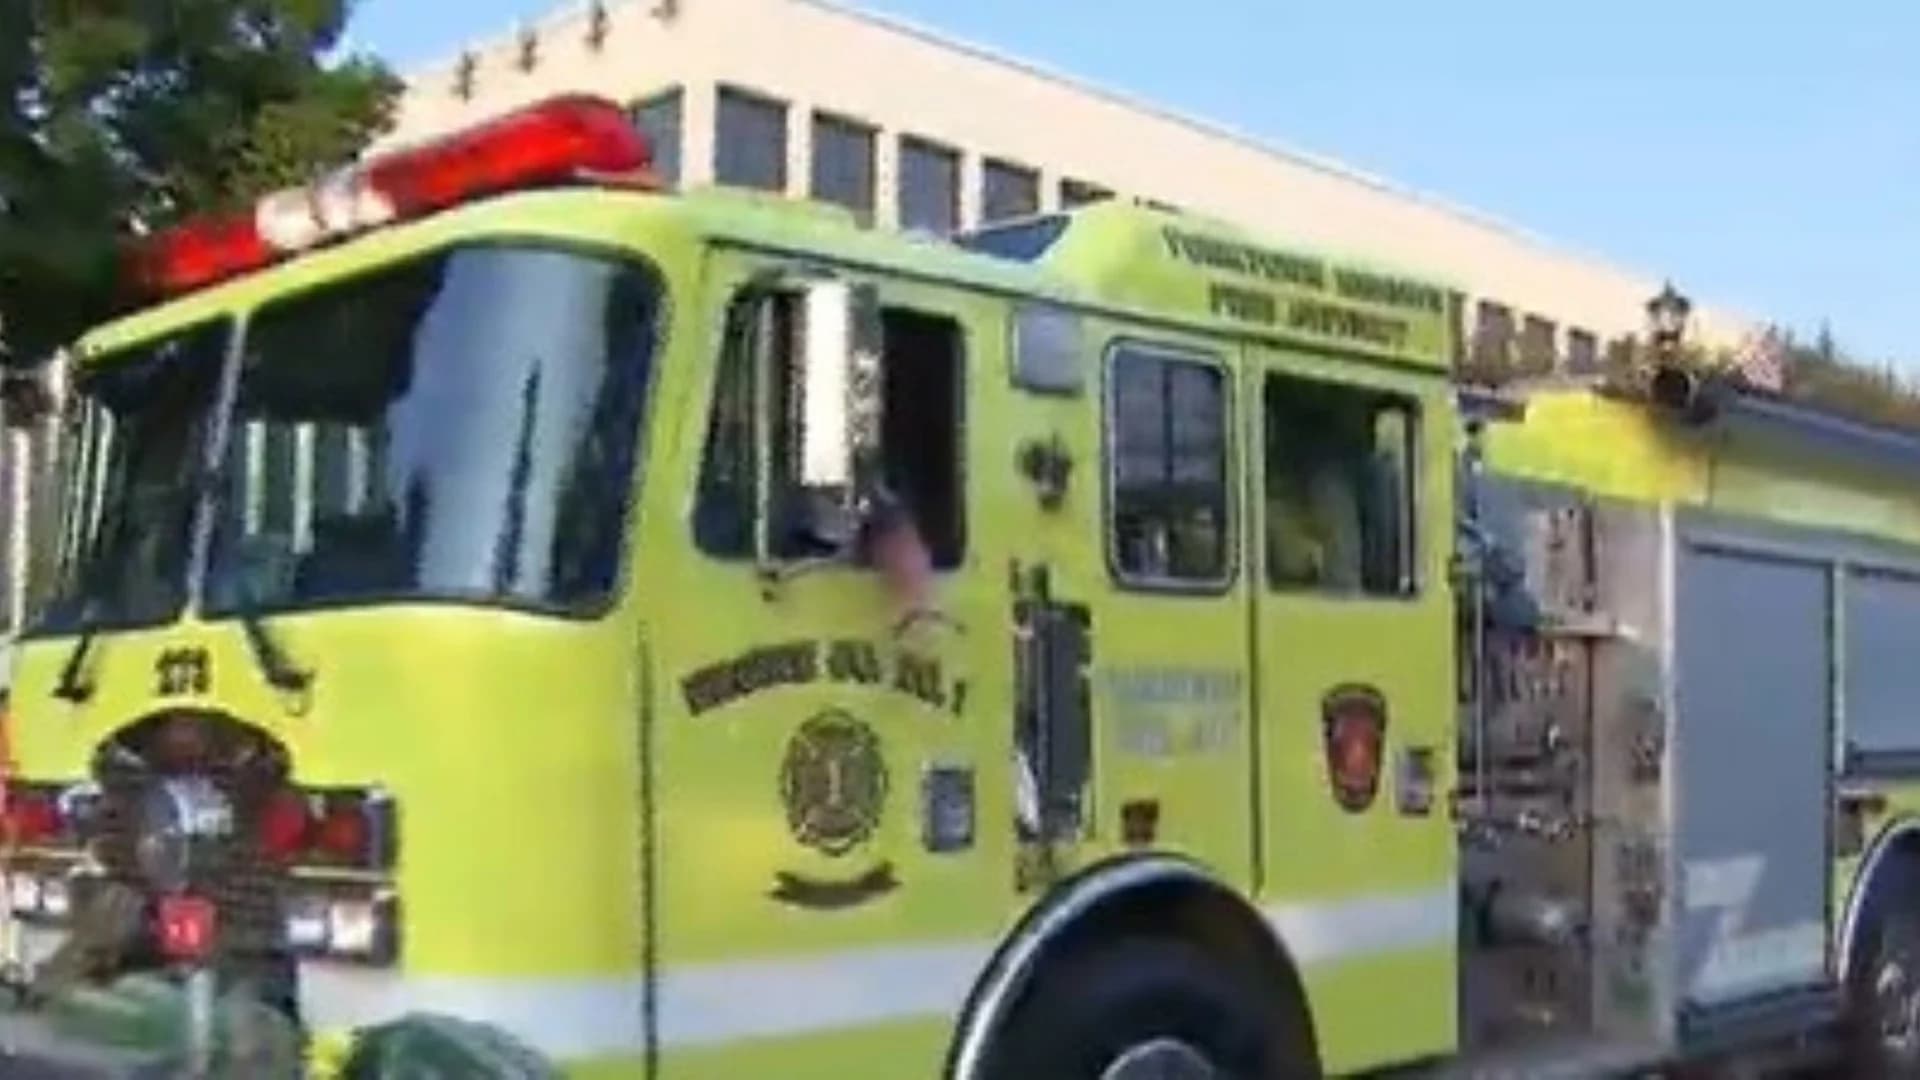 Yorktown voters approve purchase of 2 new firetrucks